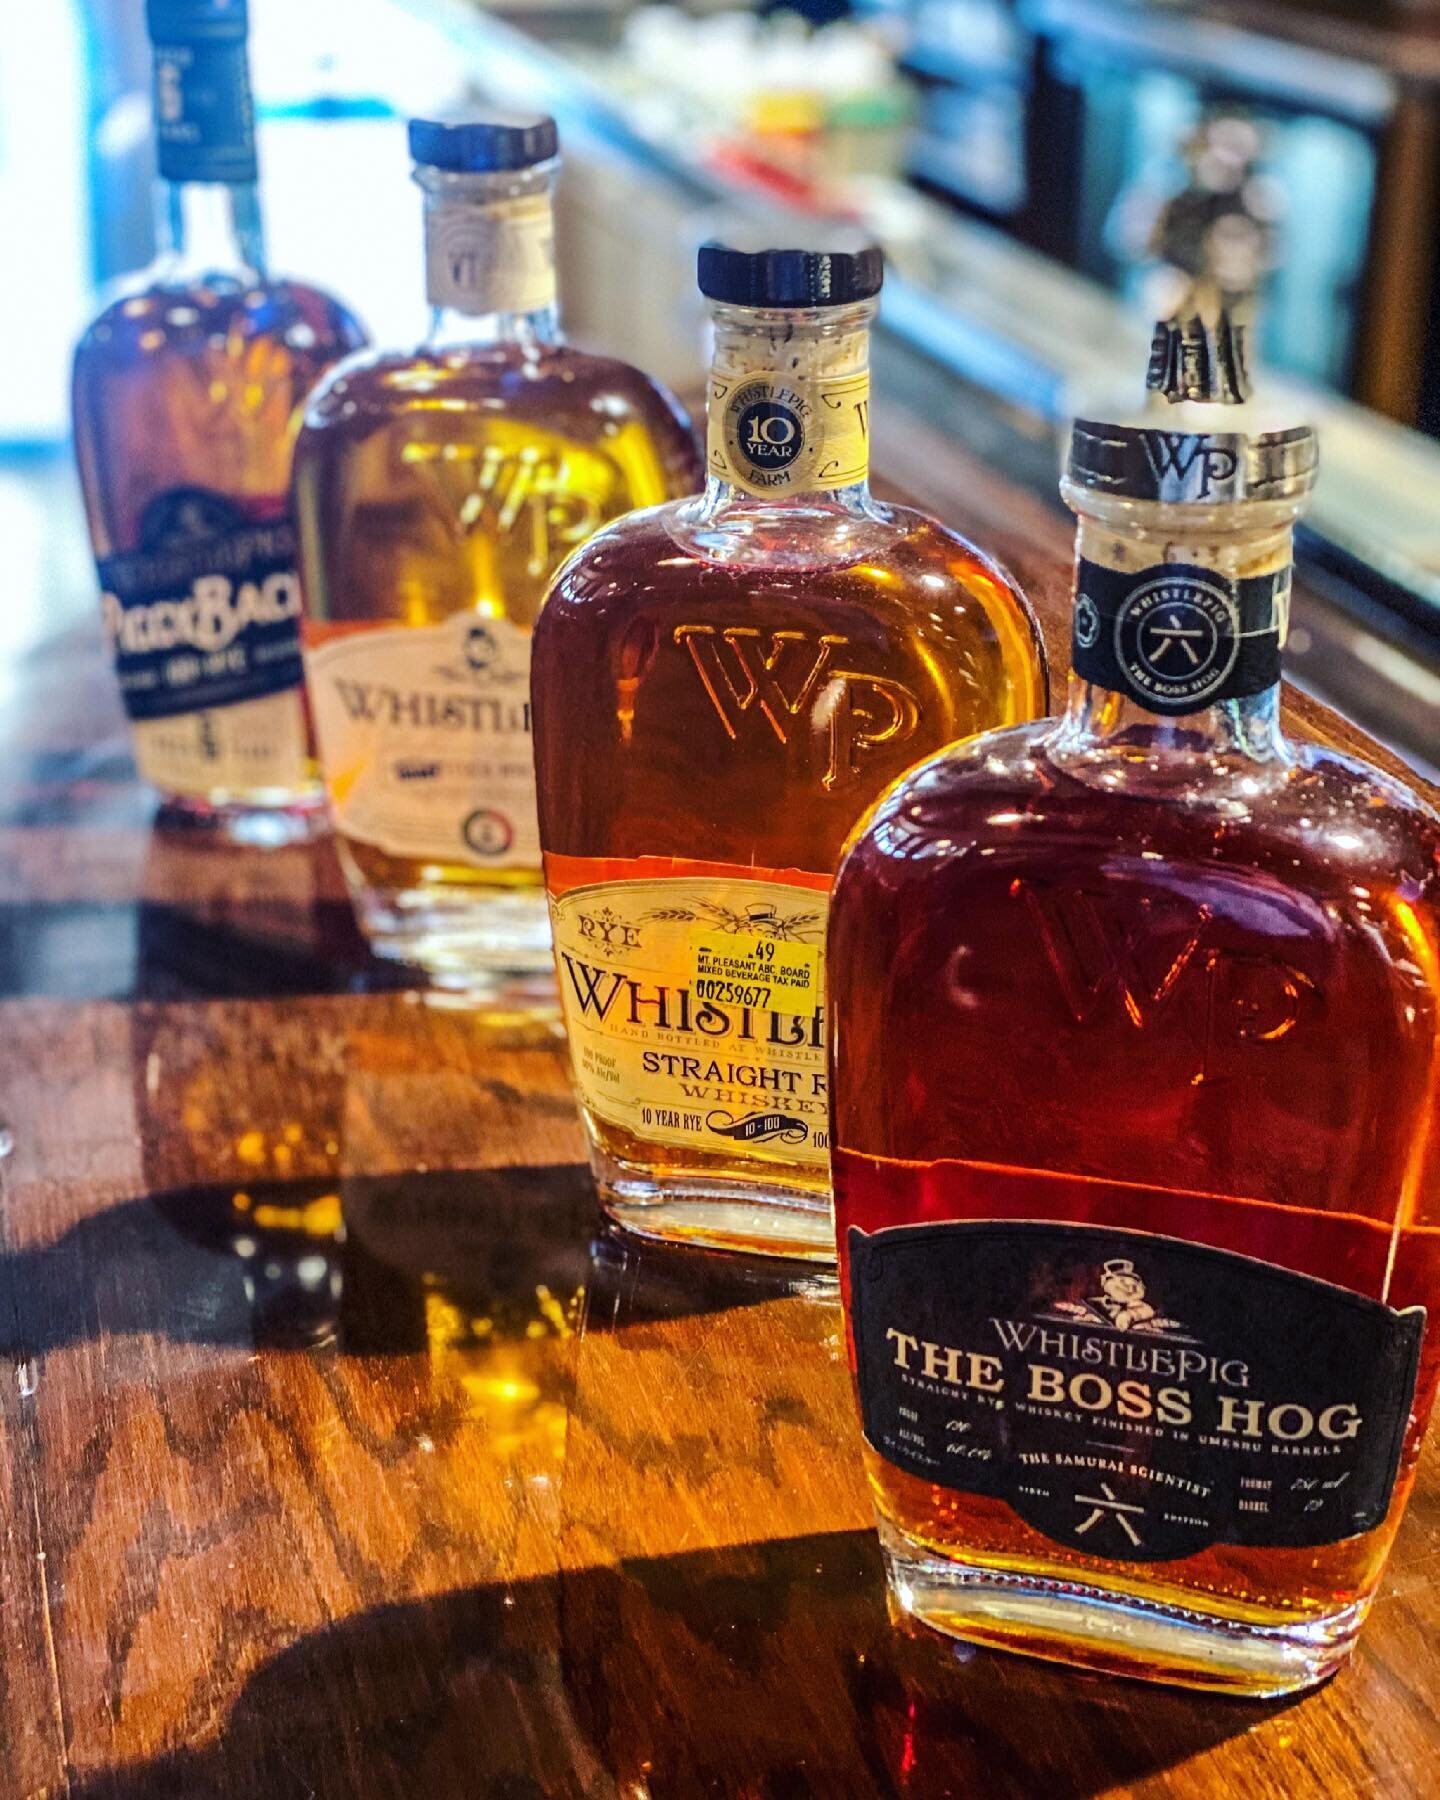 Save the date for the Whistle Pig Whiskey Dinner on March 5th. More details coming soon. Reservations will be available online. 
&bull;
#mtpleasant #cabarruscounty #cabcocraft #mtpleasantnc #northcarolinaliving #farmtotable #craftbeer #southerncharm 